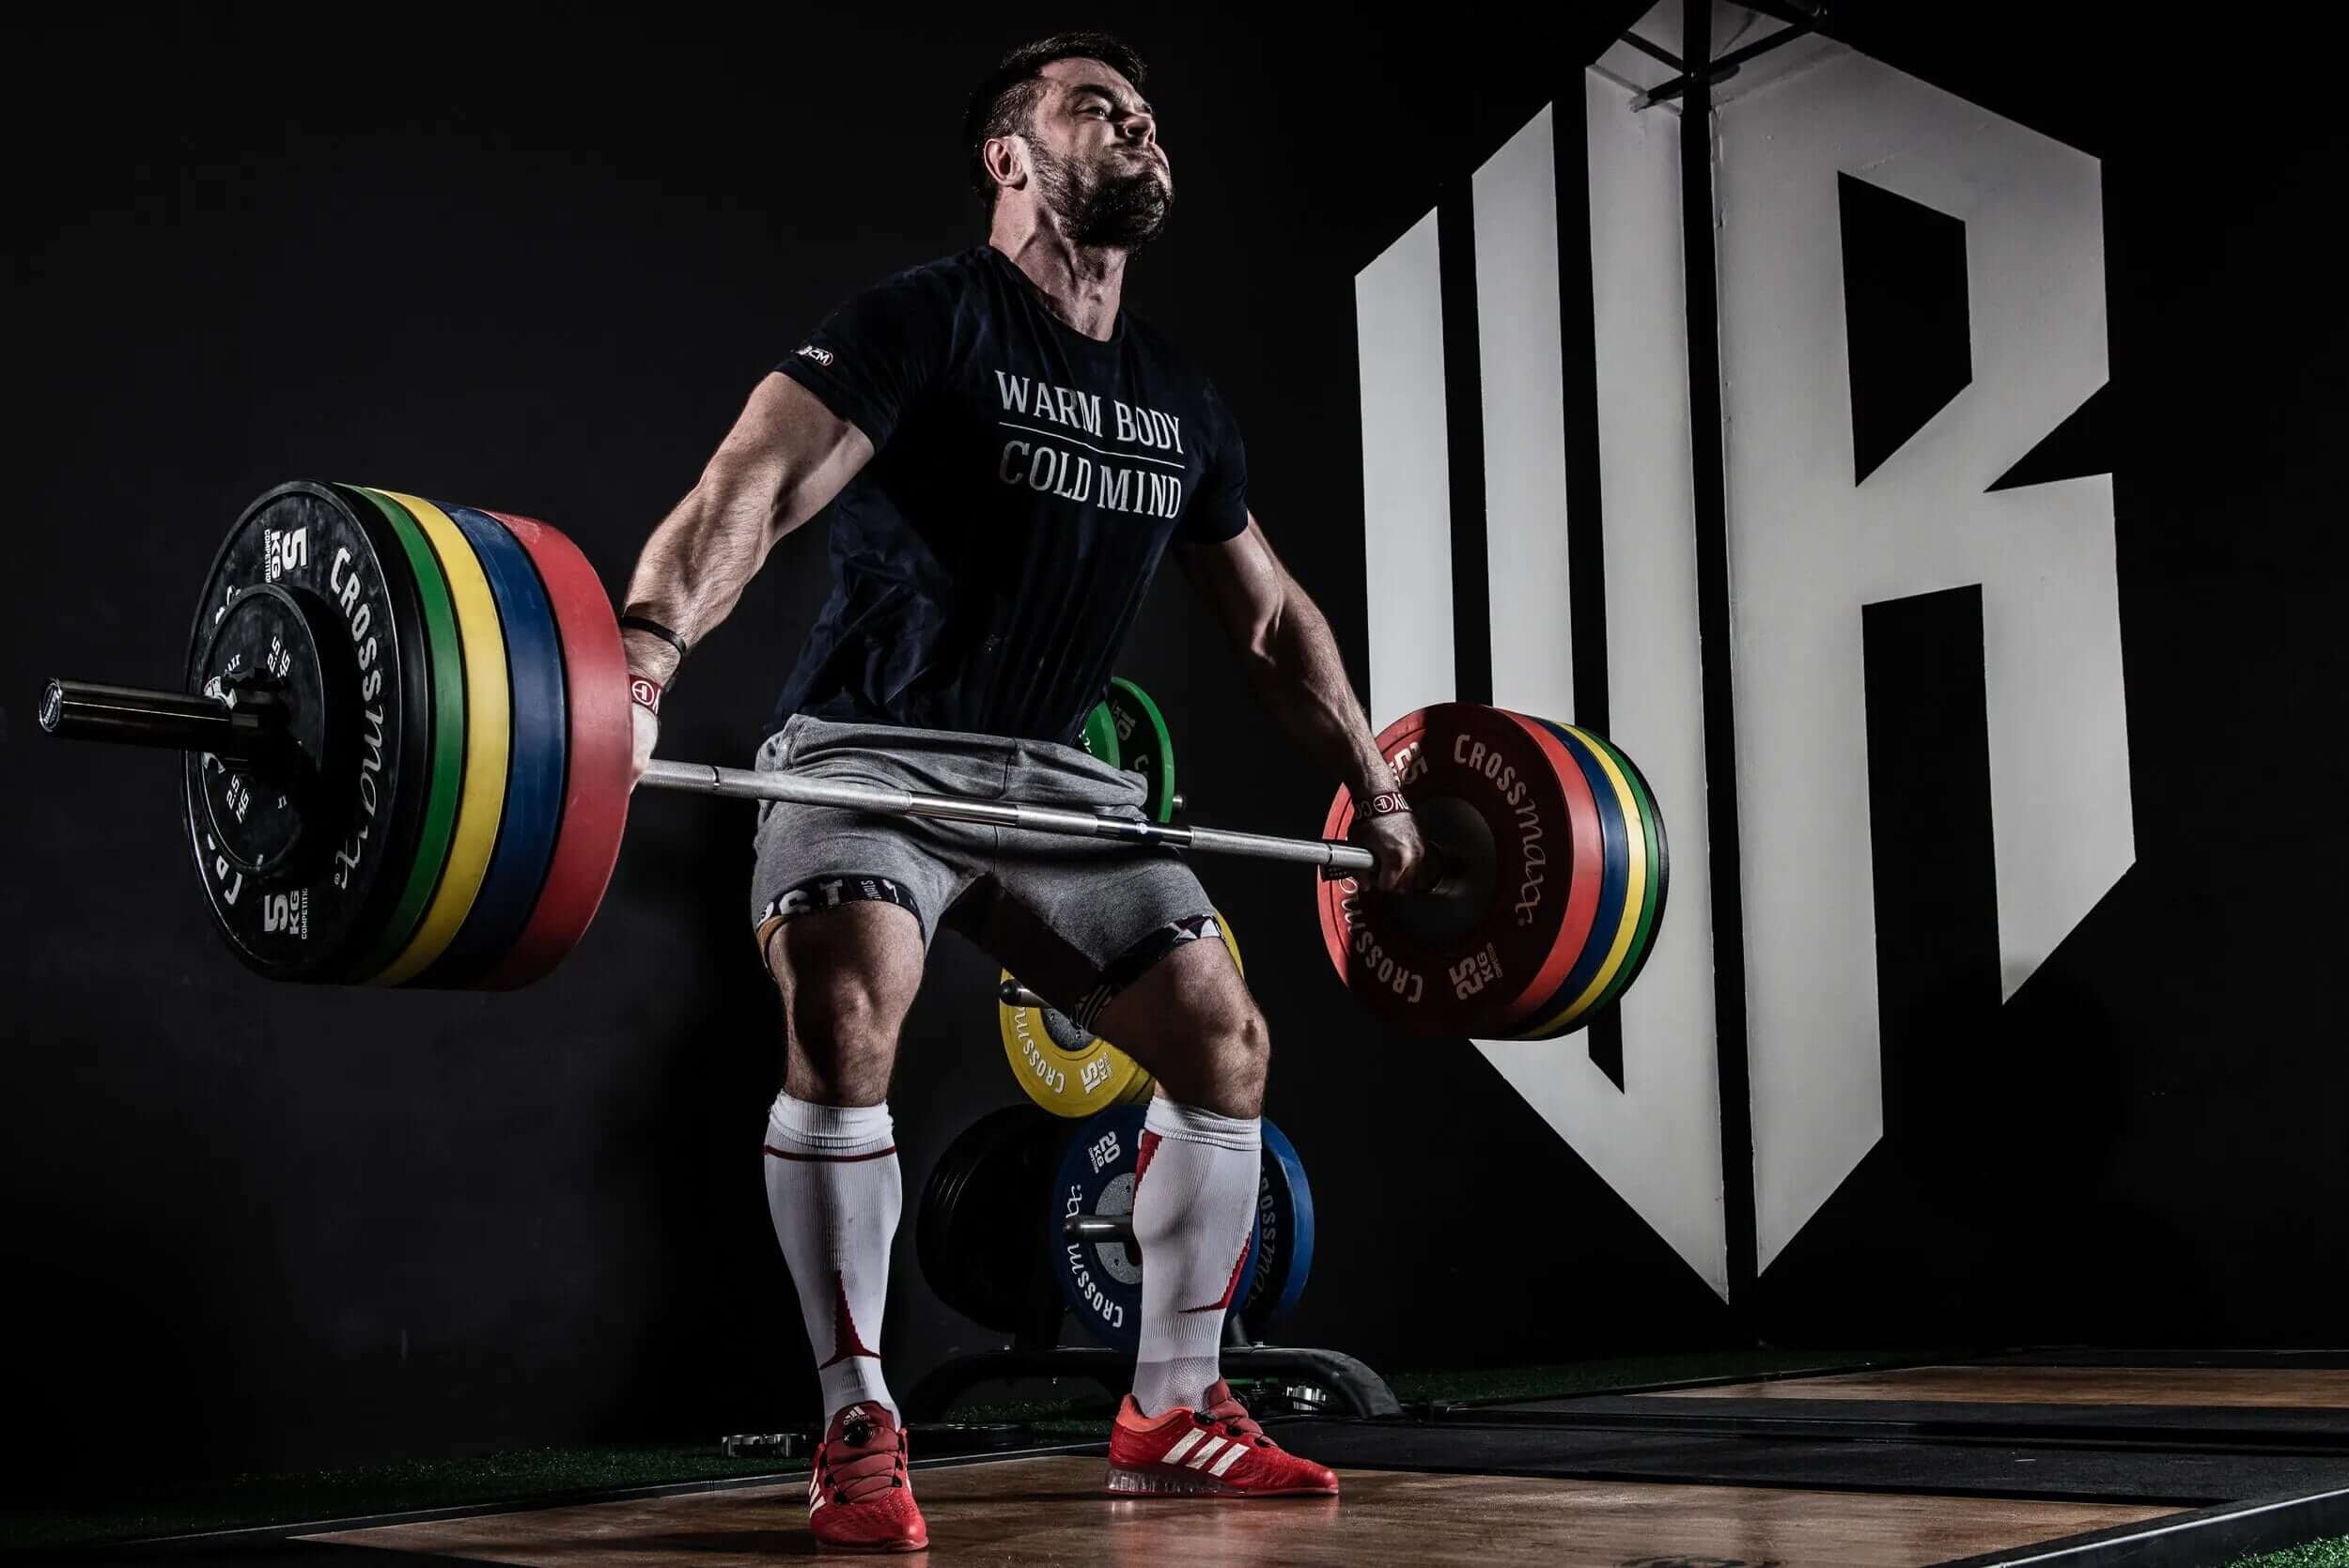 athlete lifts barbell